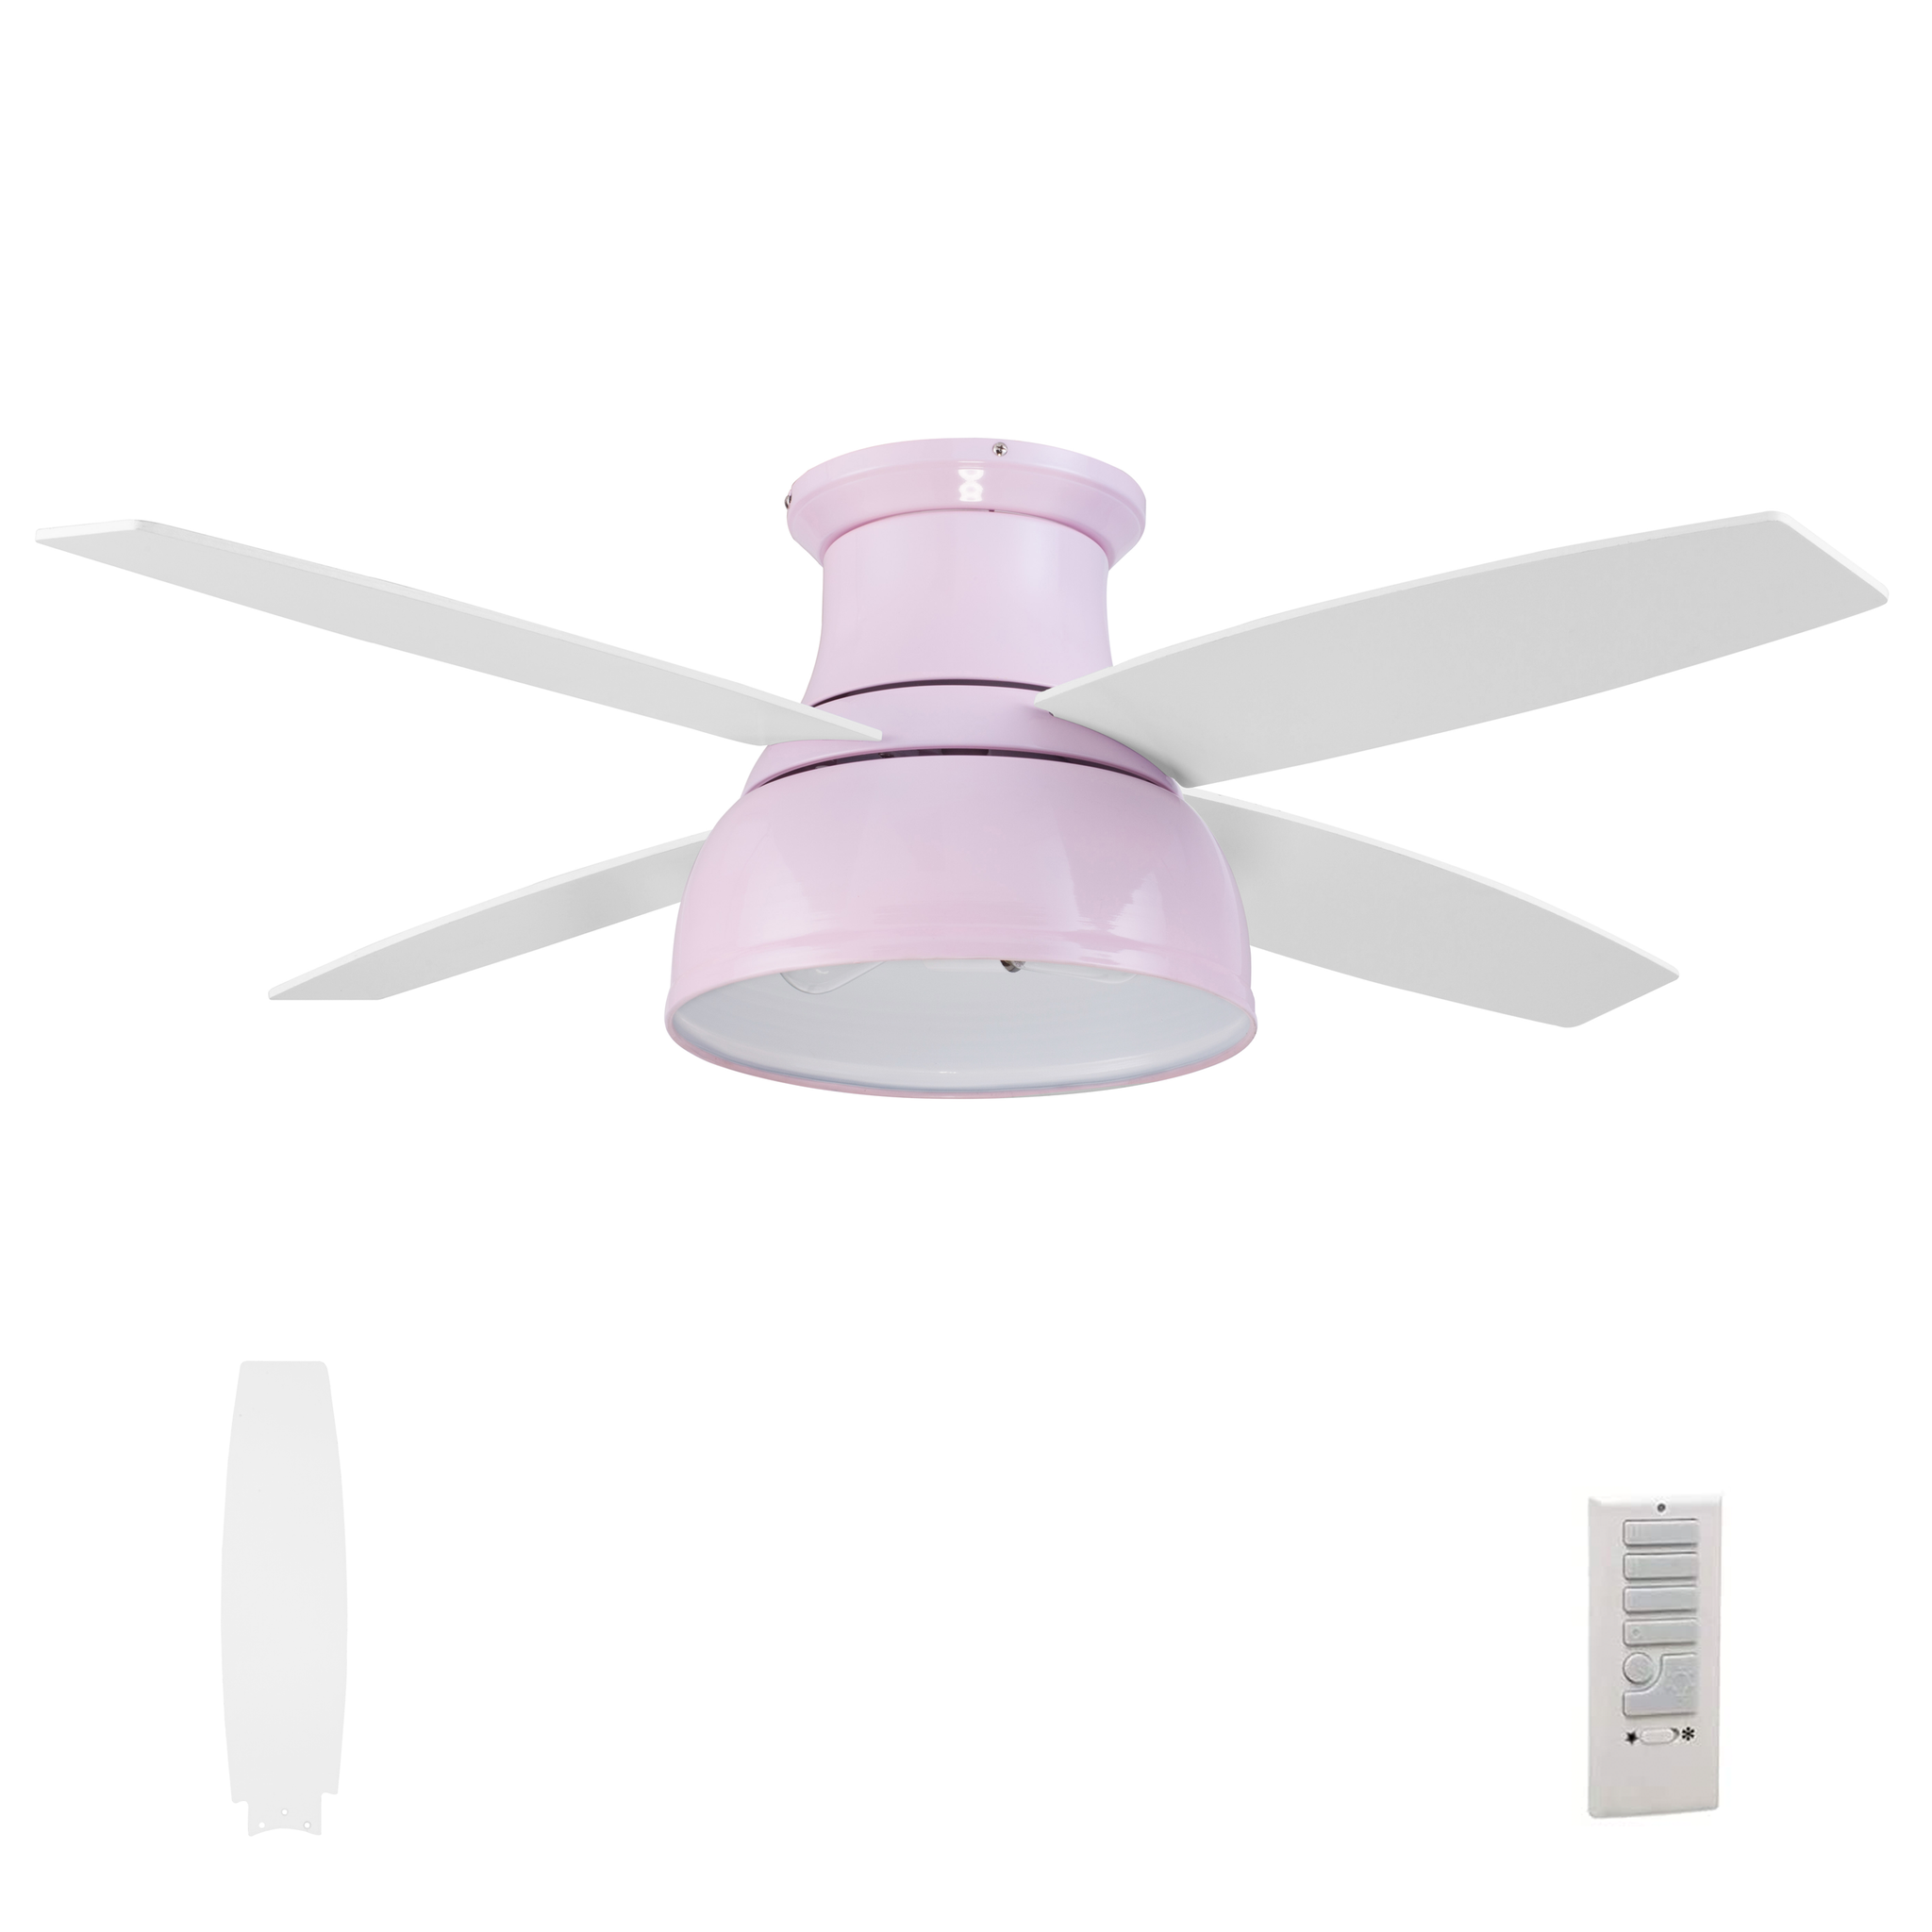 52 Inch Edora, Peony Pink, Remote Control, Ceiling Fan by Prominence Home